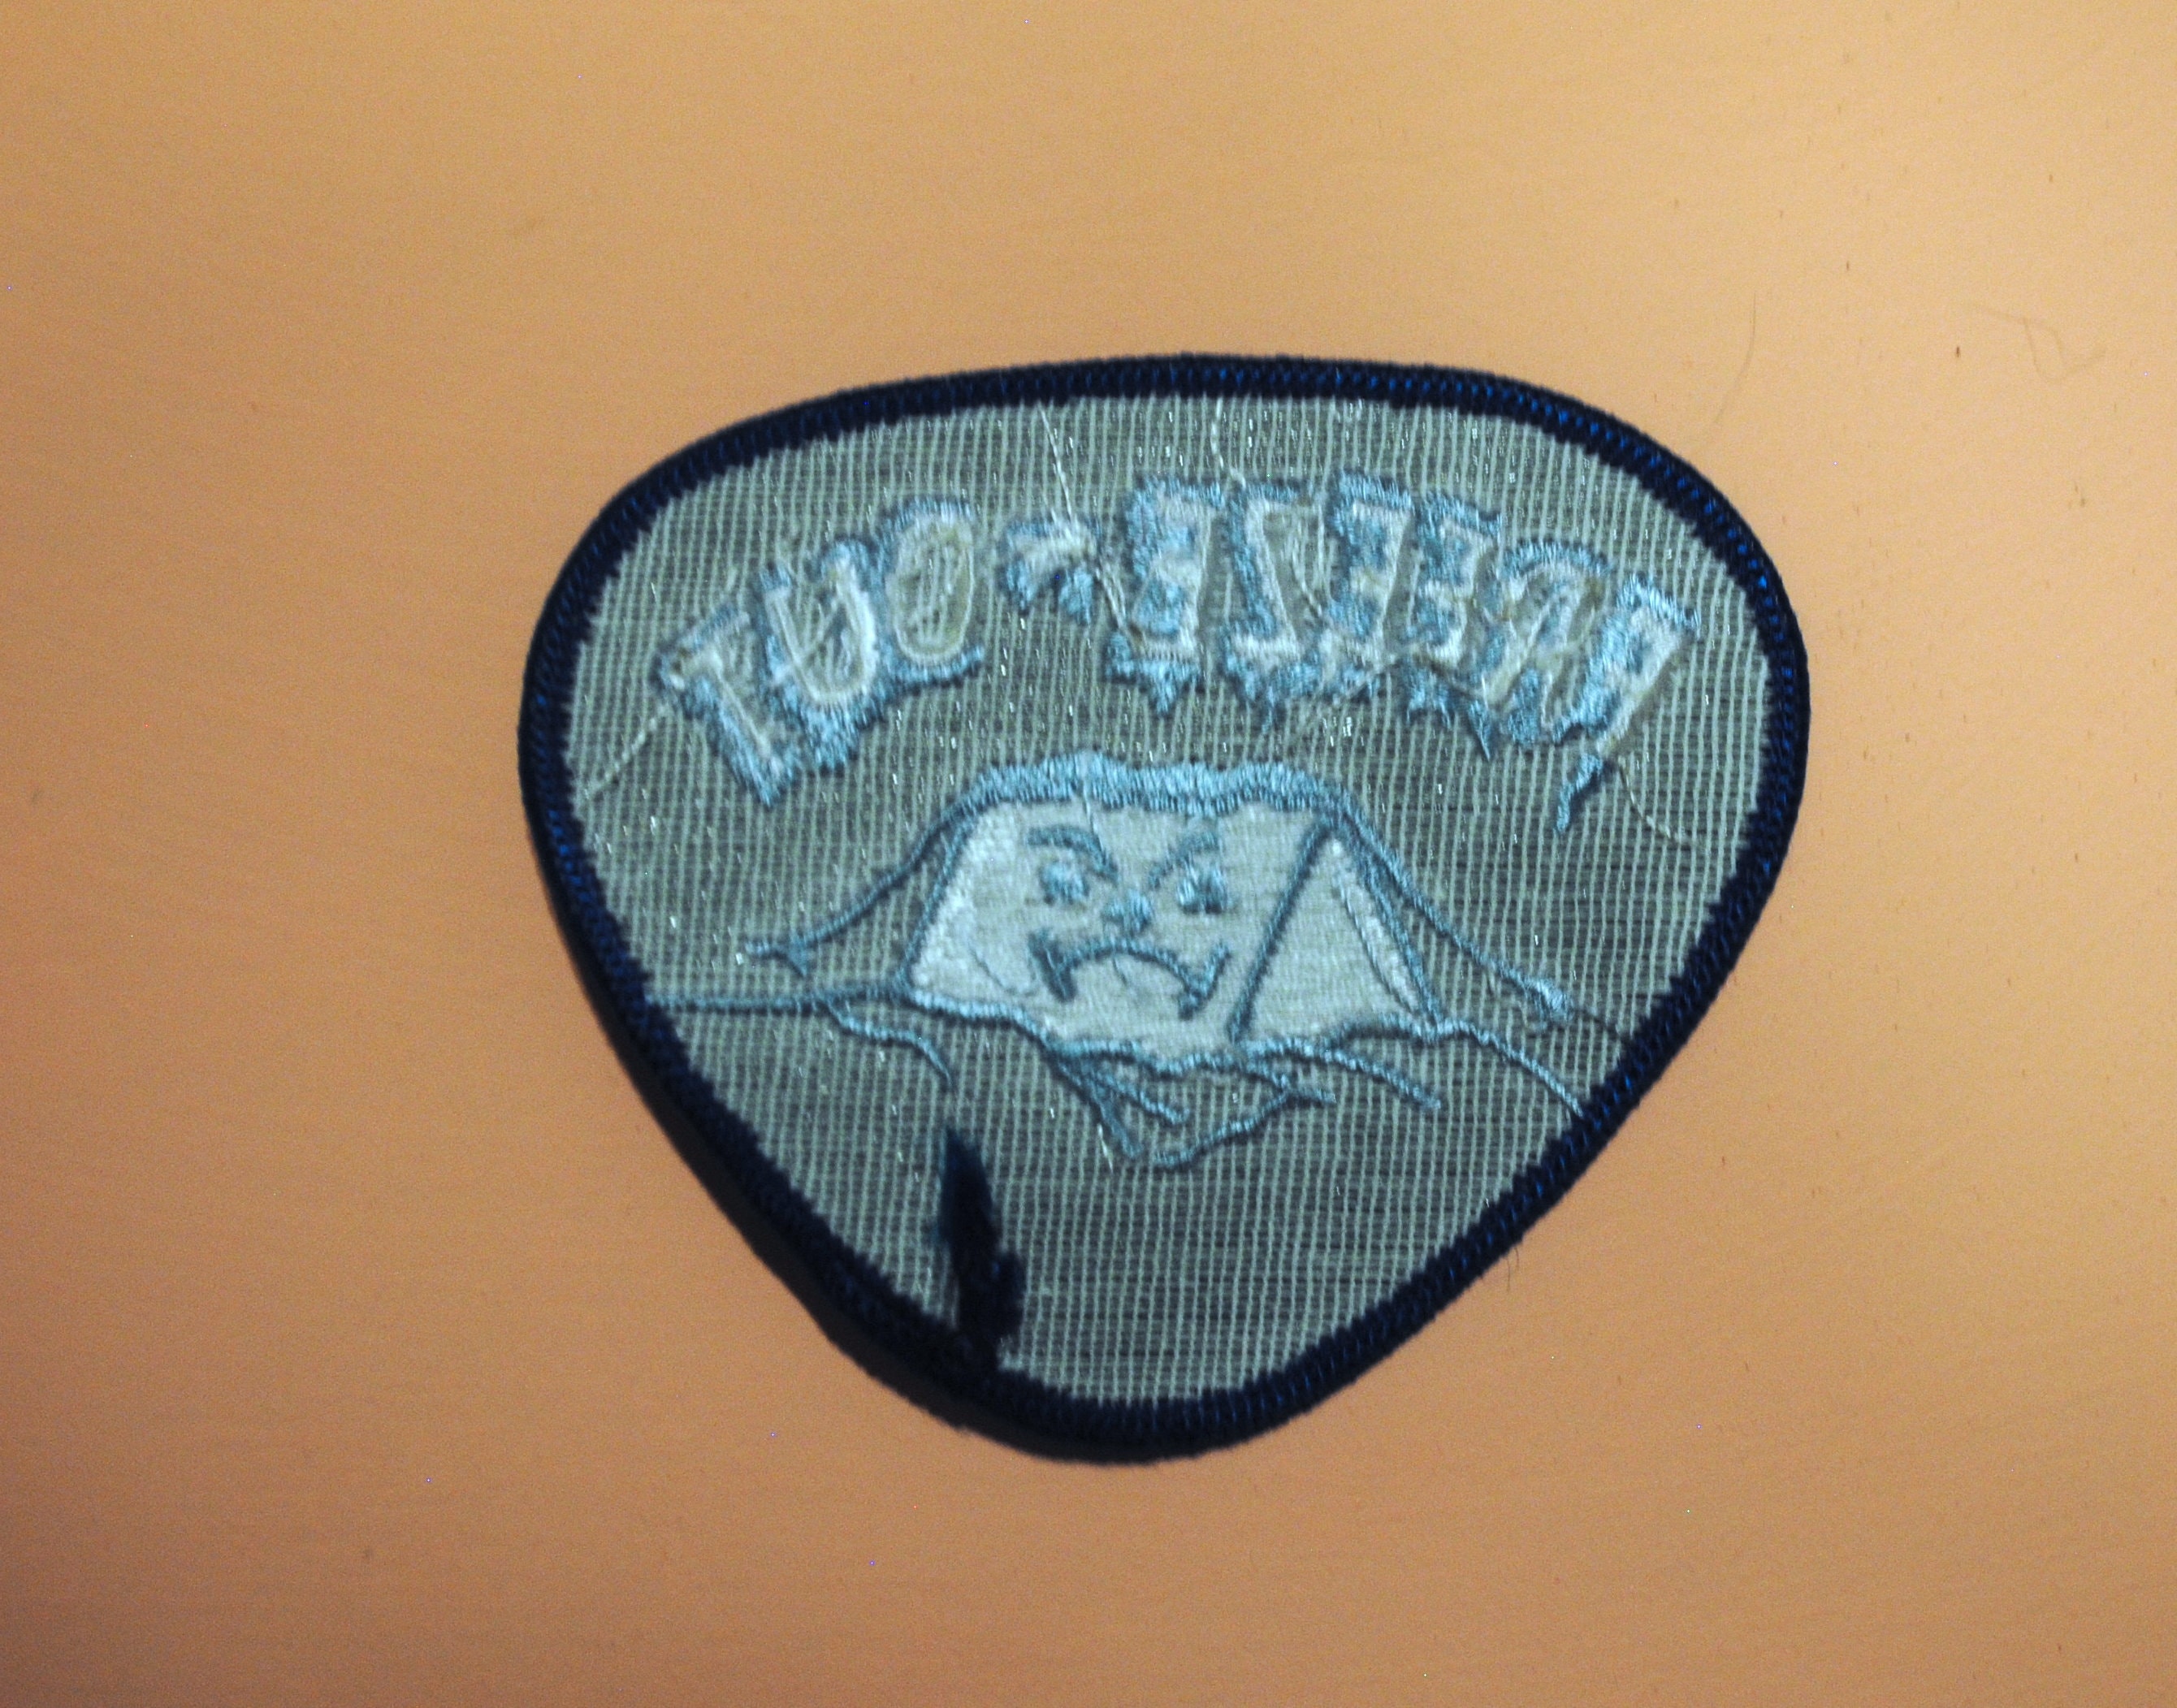 FREEZE OUT Cold Winter Freezing Camp Vintage Patch